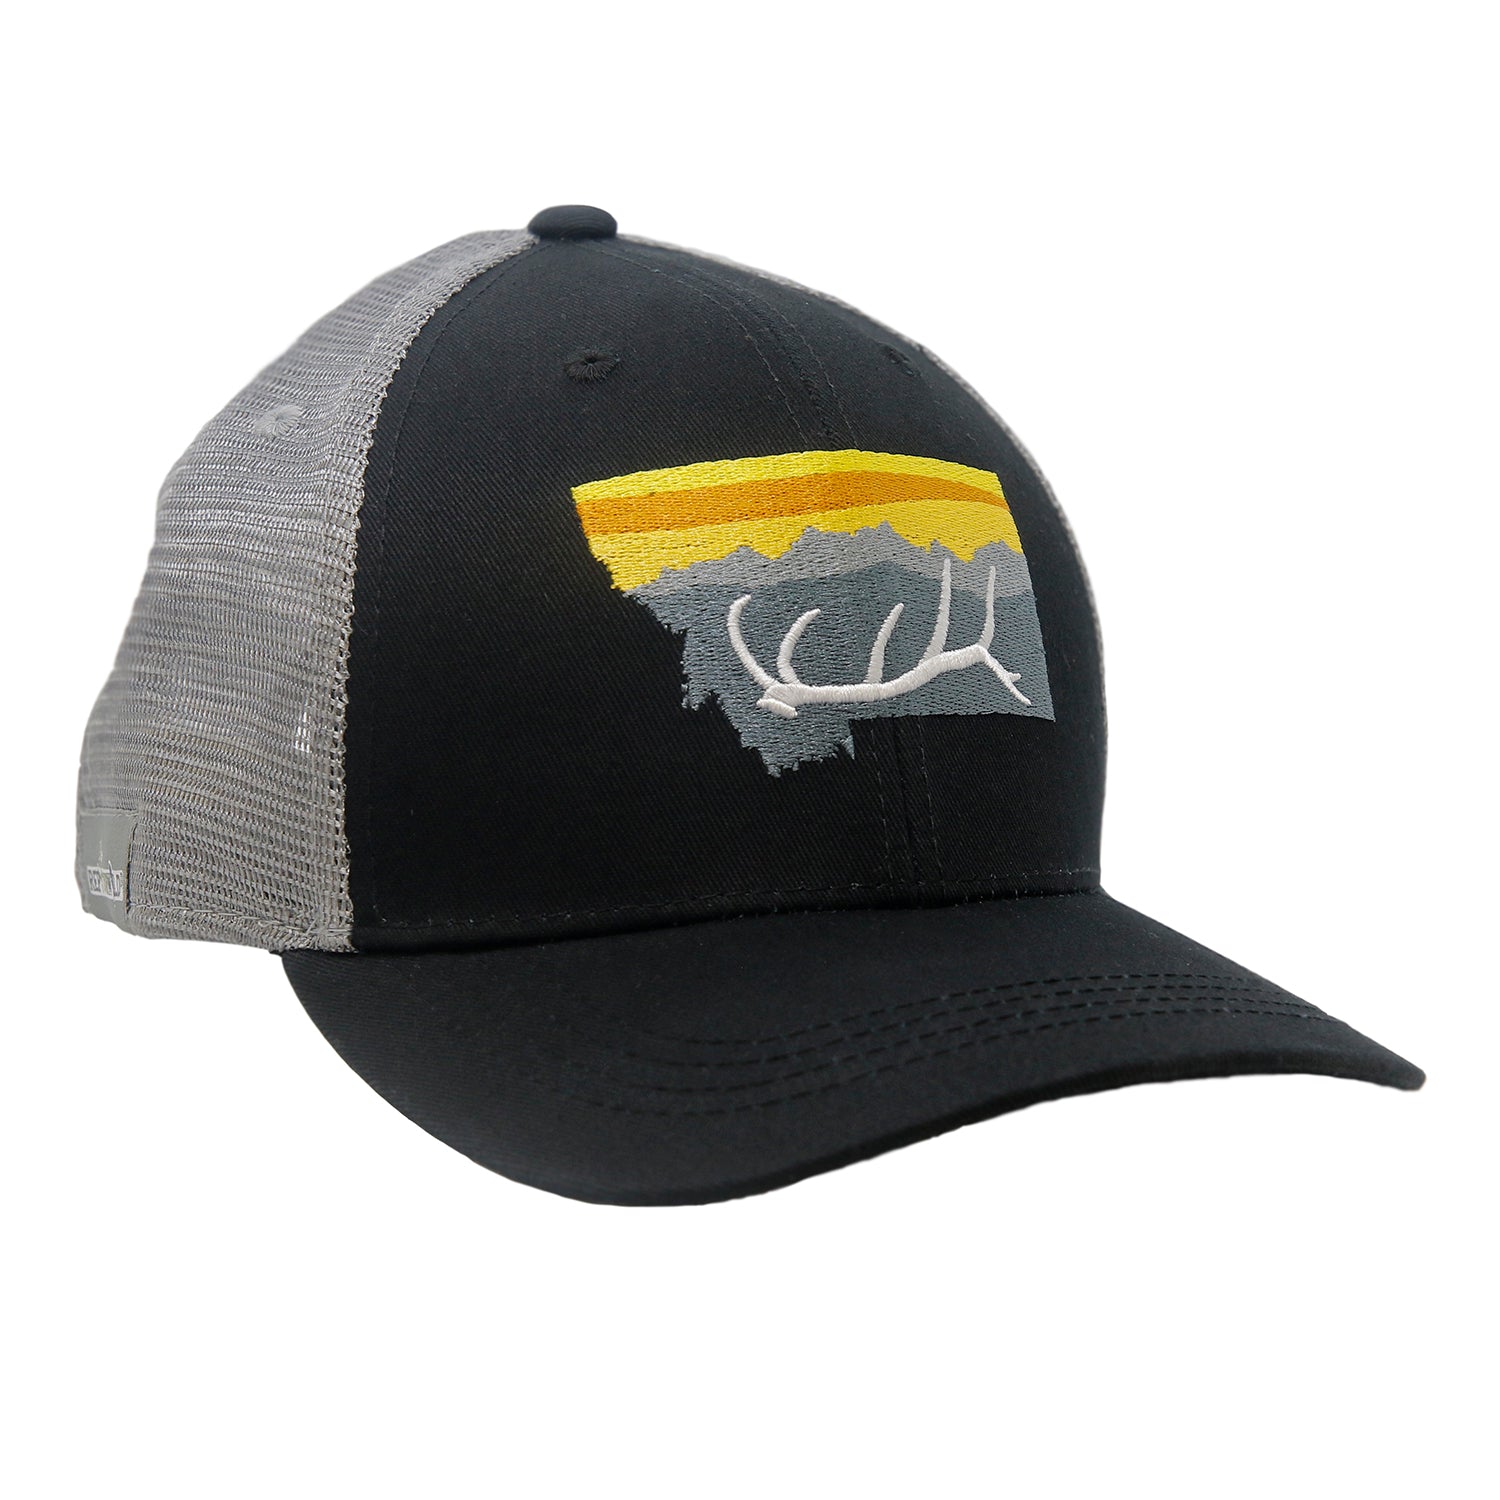 A hat with gray mesh and black fabric front has the shape of montana on the front with an elk antler inside